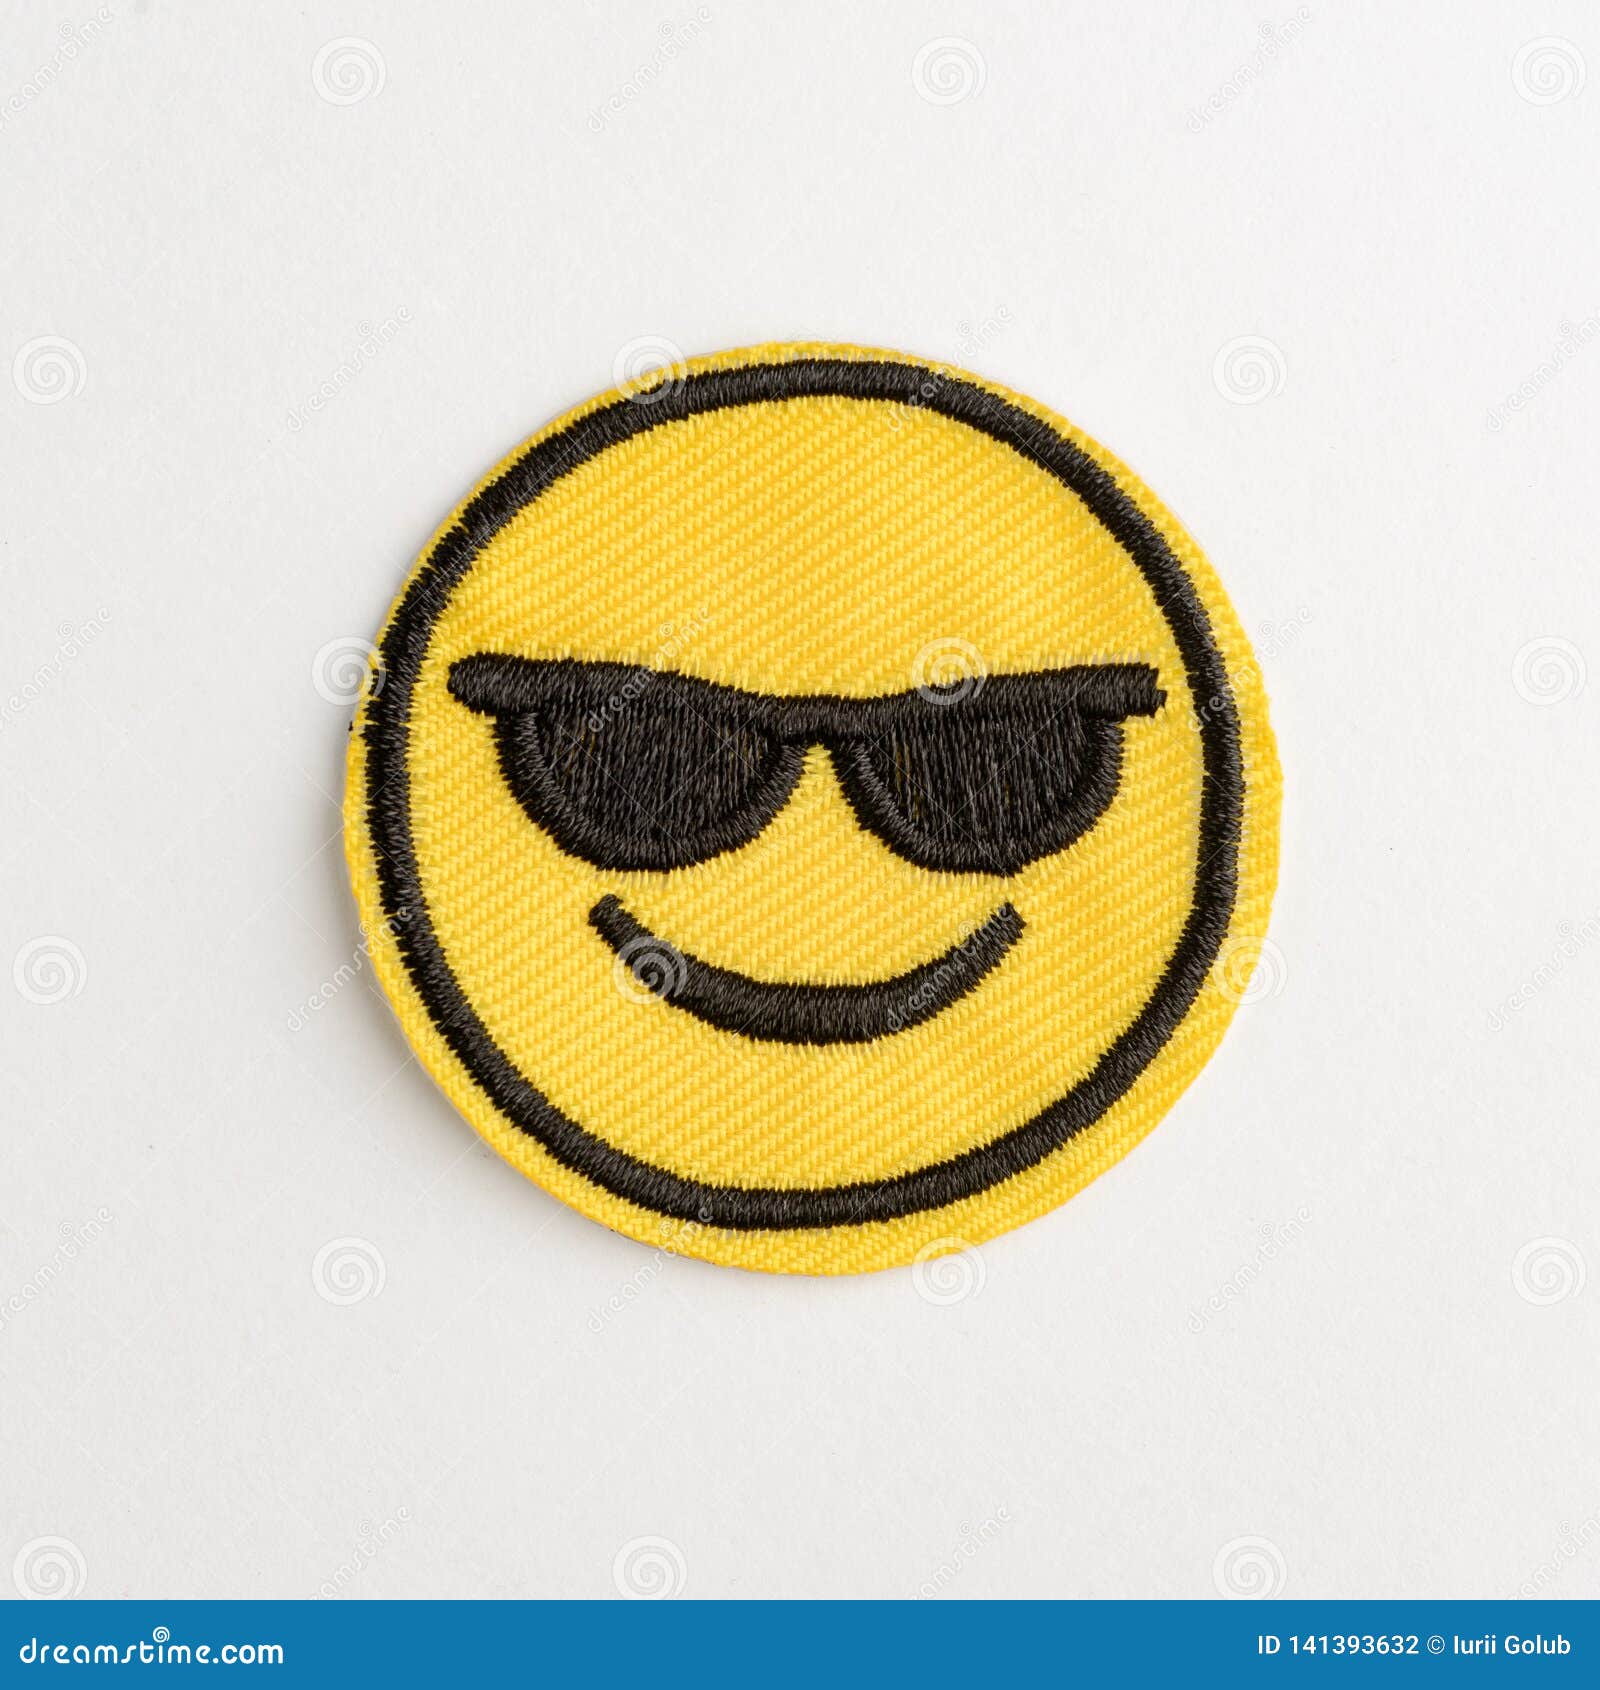 Devil Emoji with Smiley and Horn Badge Iron on Sew on Embroidered Patch 